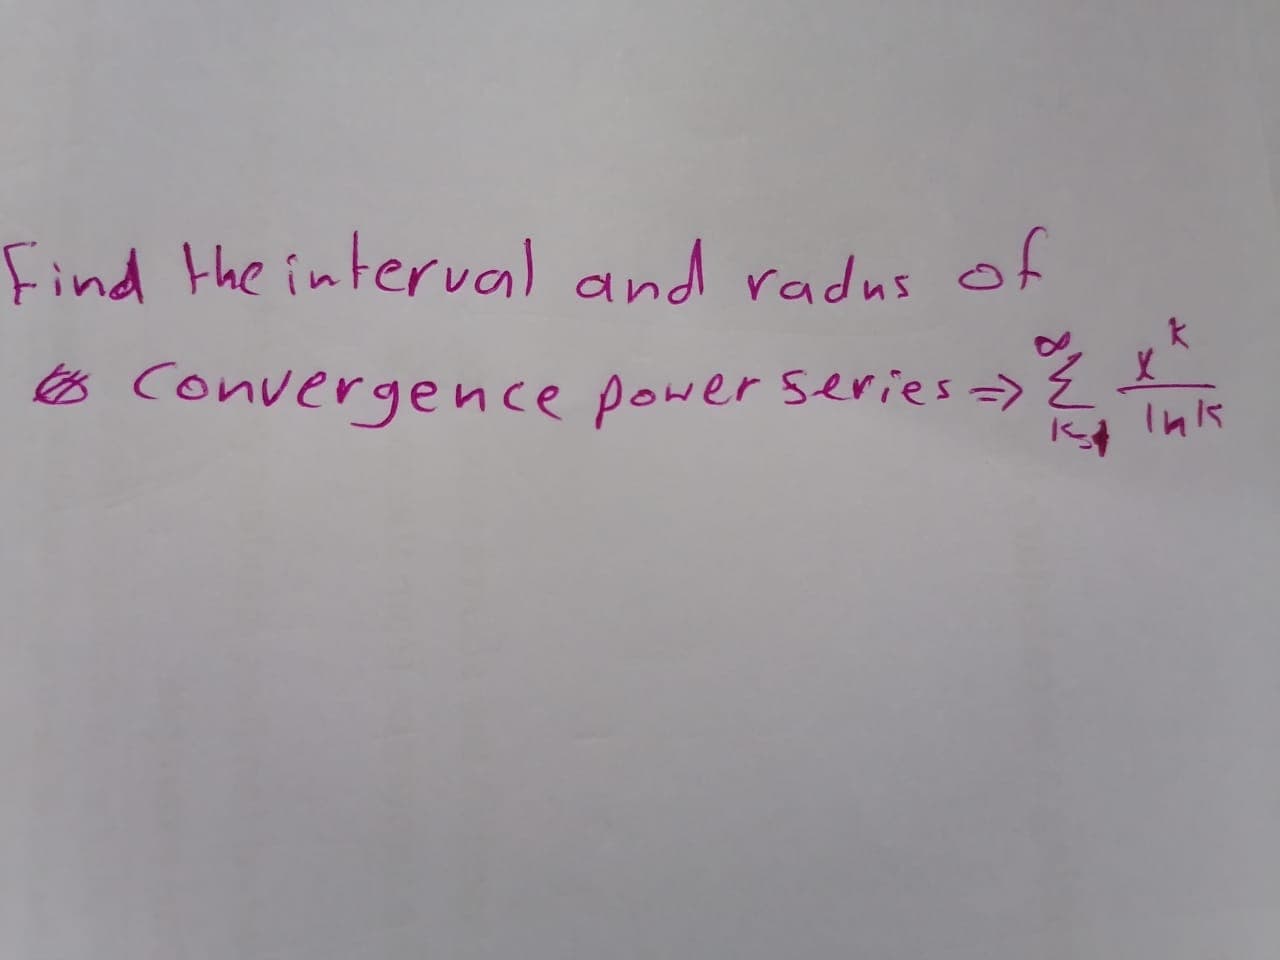 Find the interval and radus o
8 convergence power series ->
Ins
